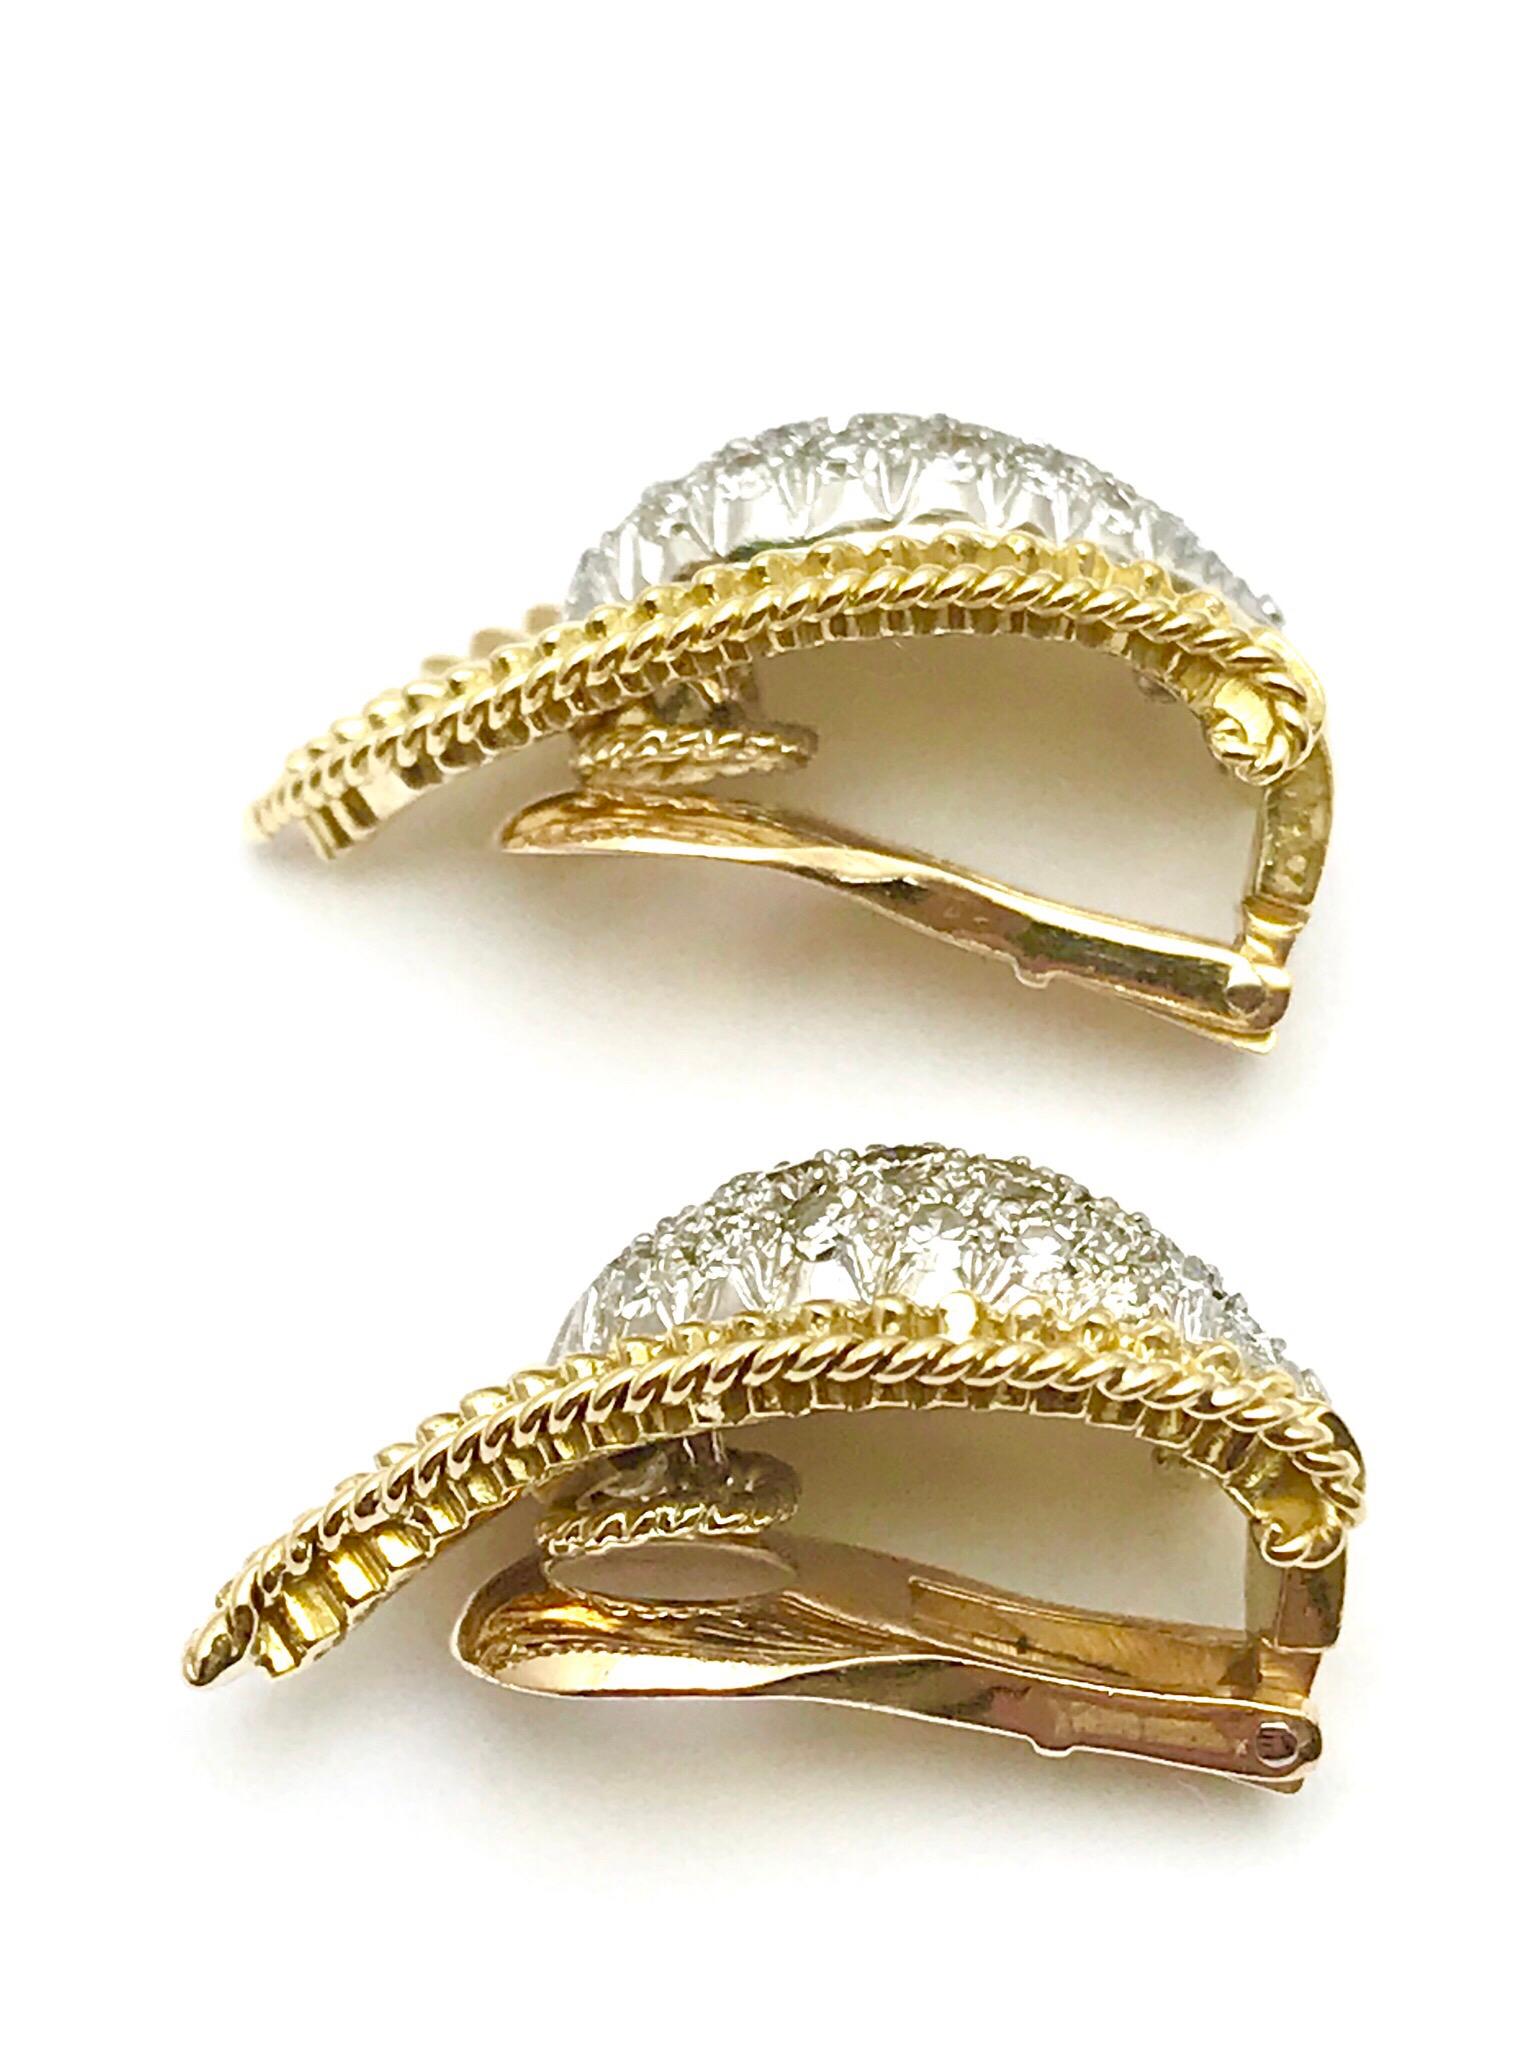 A pair of pave diamond and 18 karat yellow gold leaf clip on earrings.  Designed with a pave diamond center, surrounded by textured gold with a rope edge.  There are 40 round faceted diamonds with a total weight of .90 carats.  The earrings feature